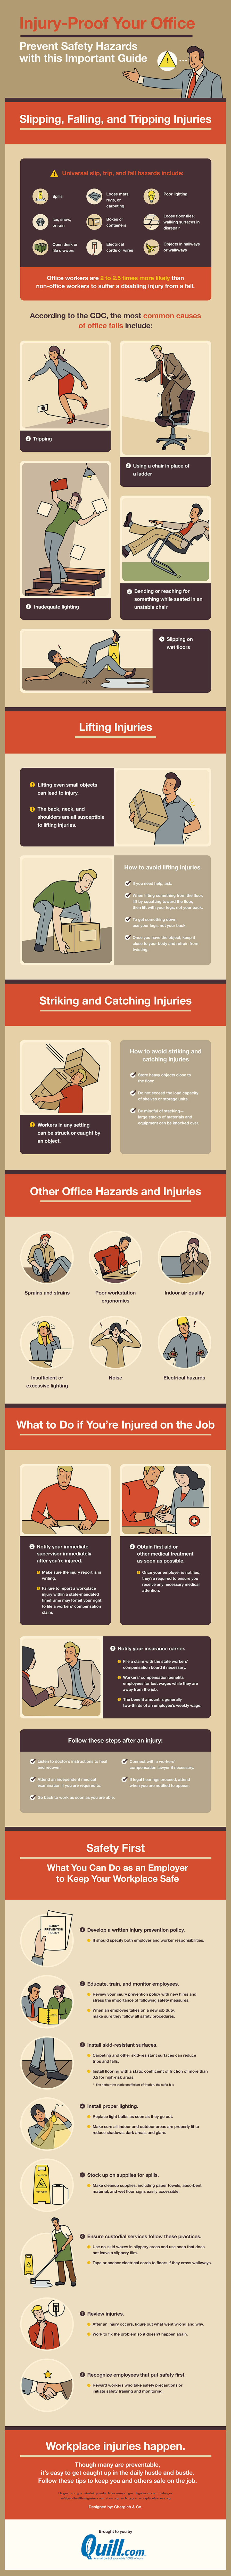 injury proof office infographic